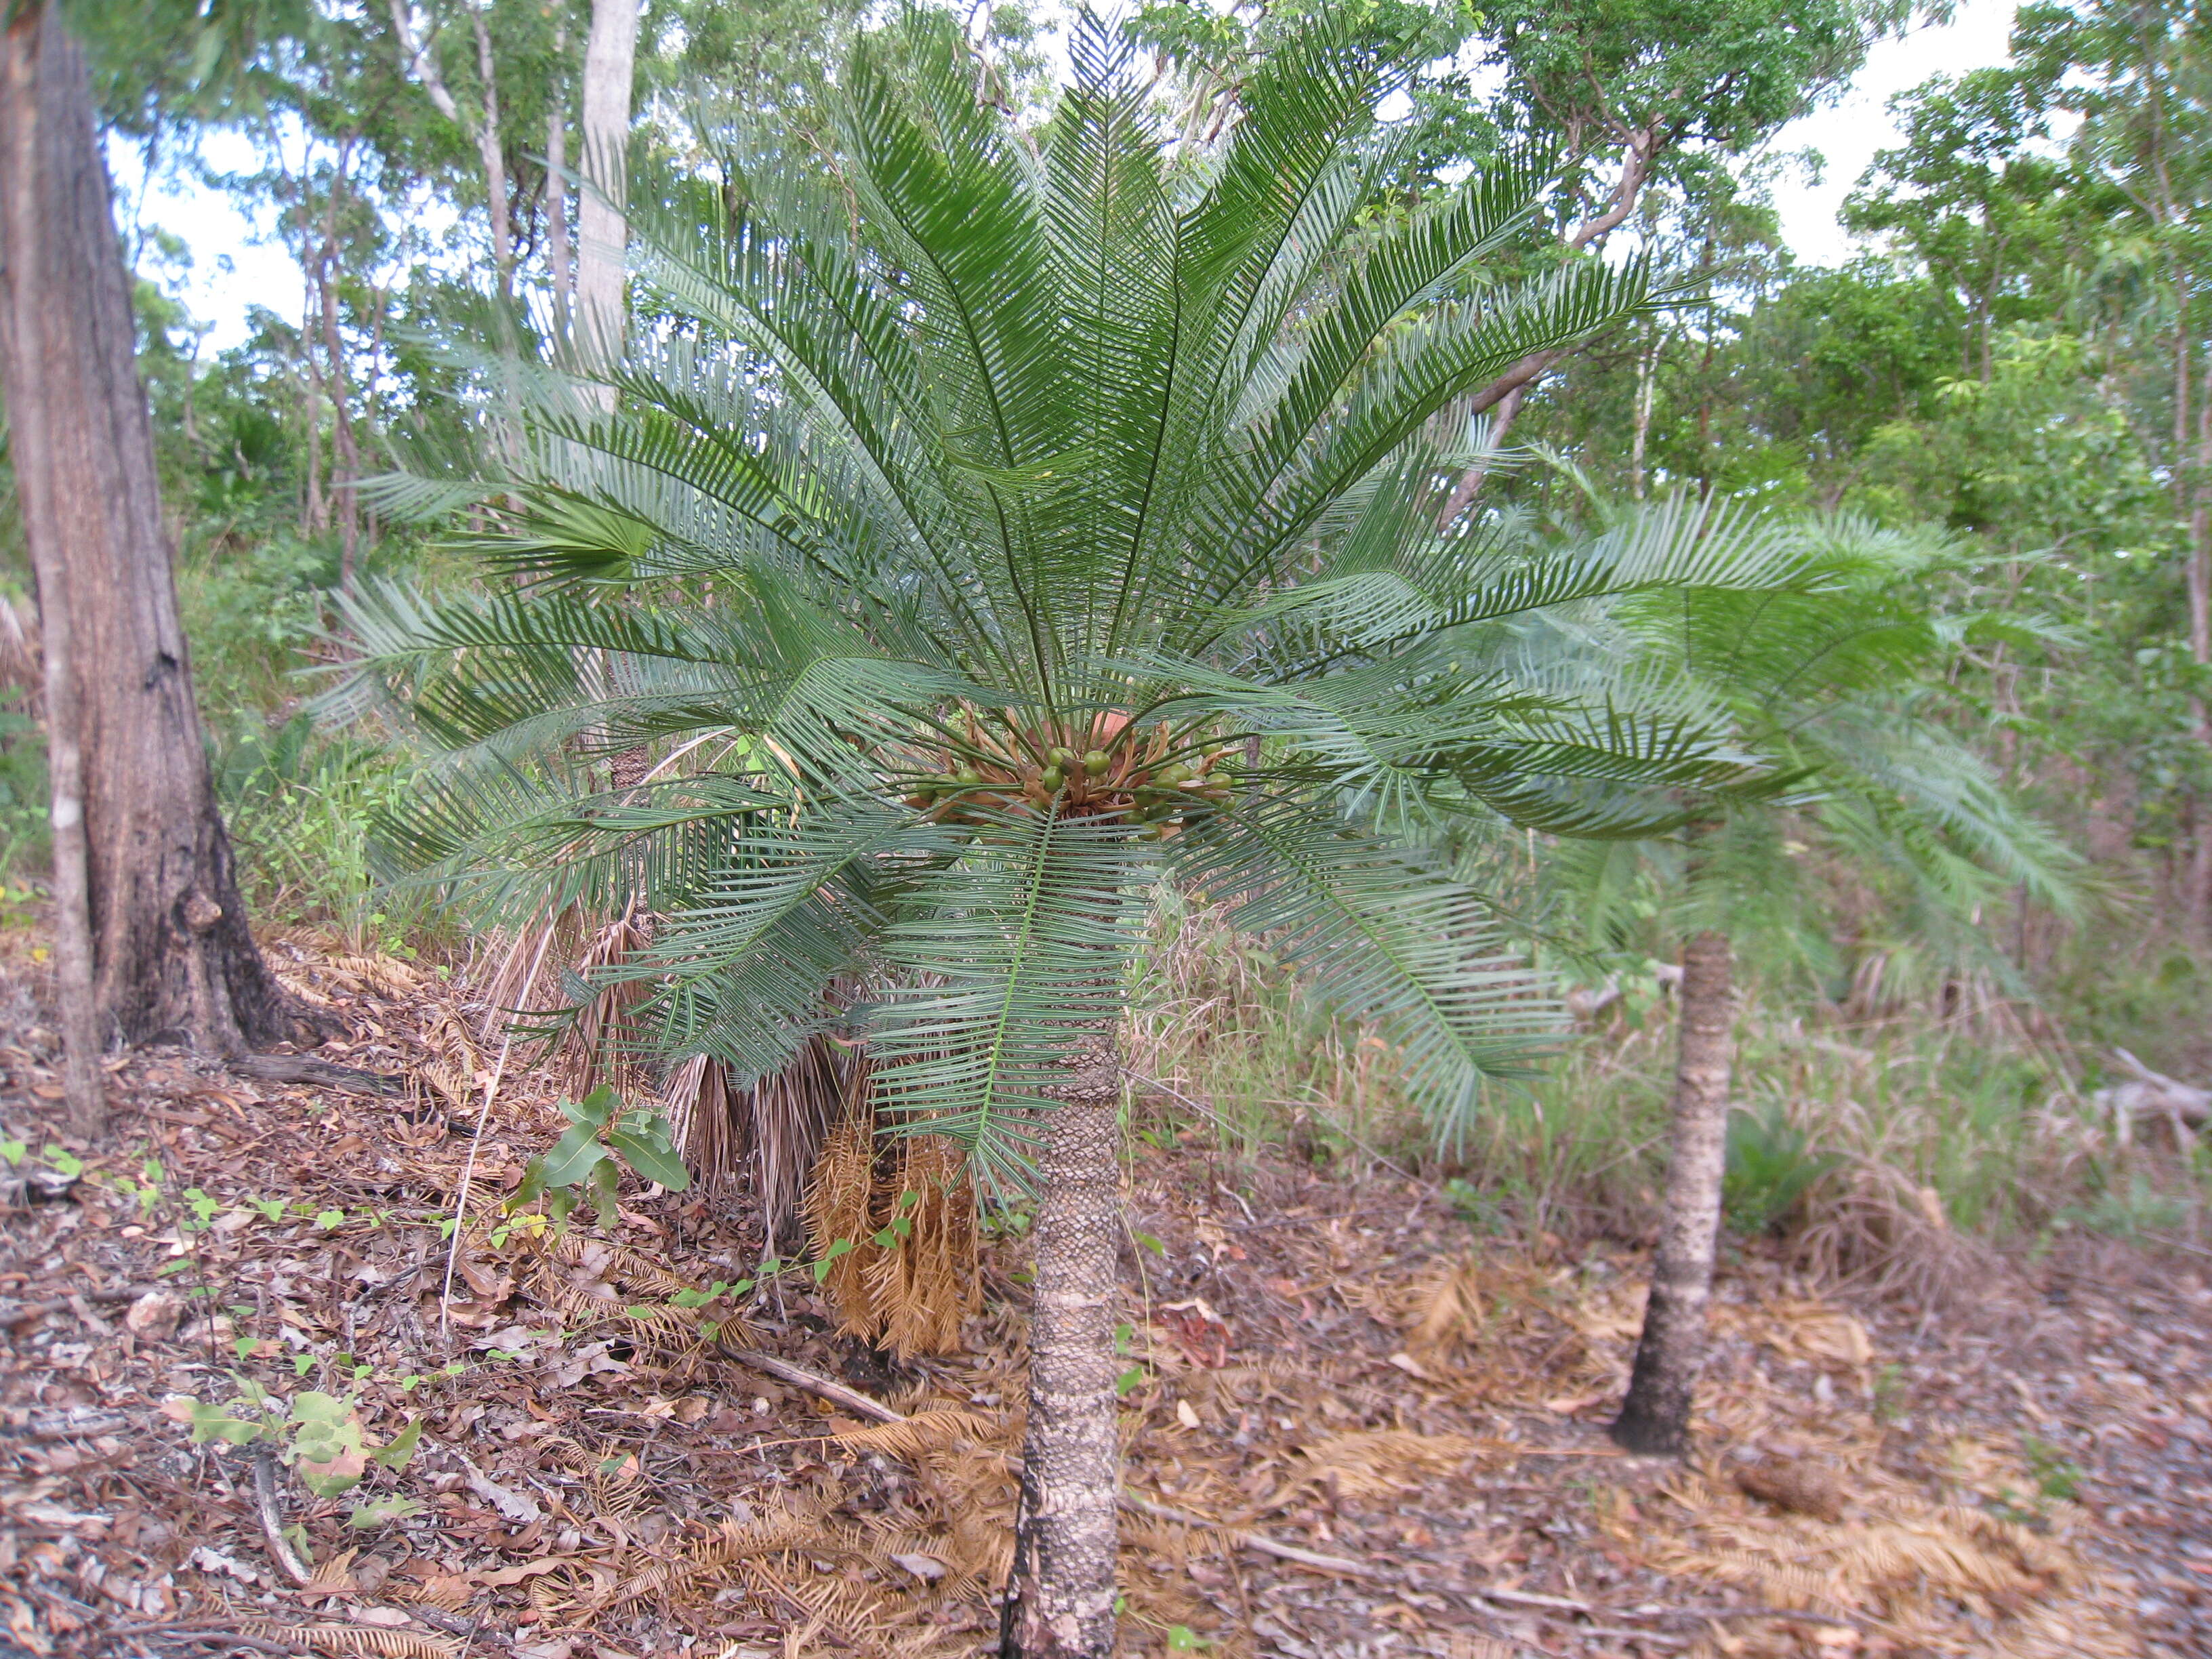 Image of Cycas armstrongii Miq.